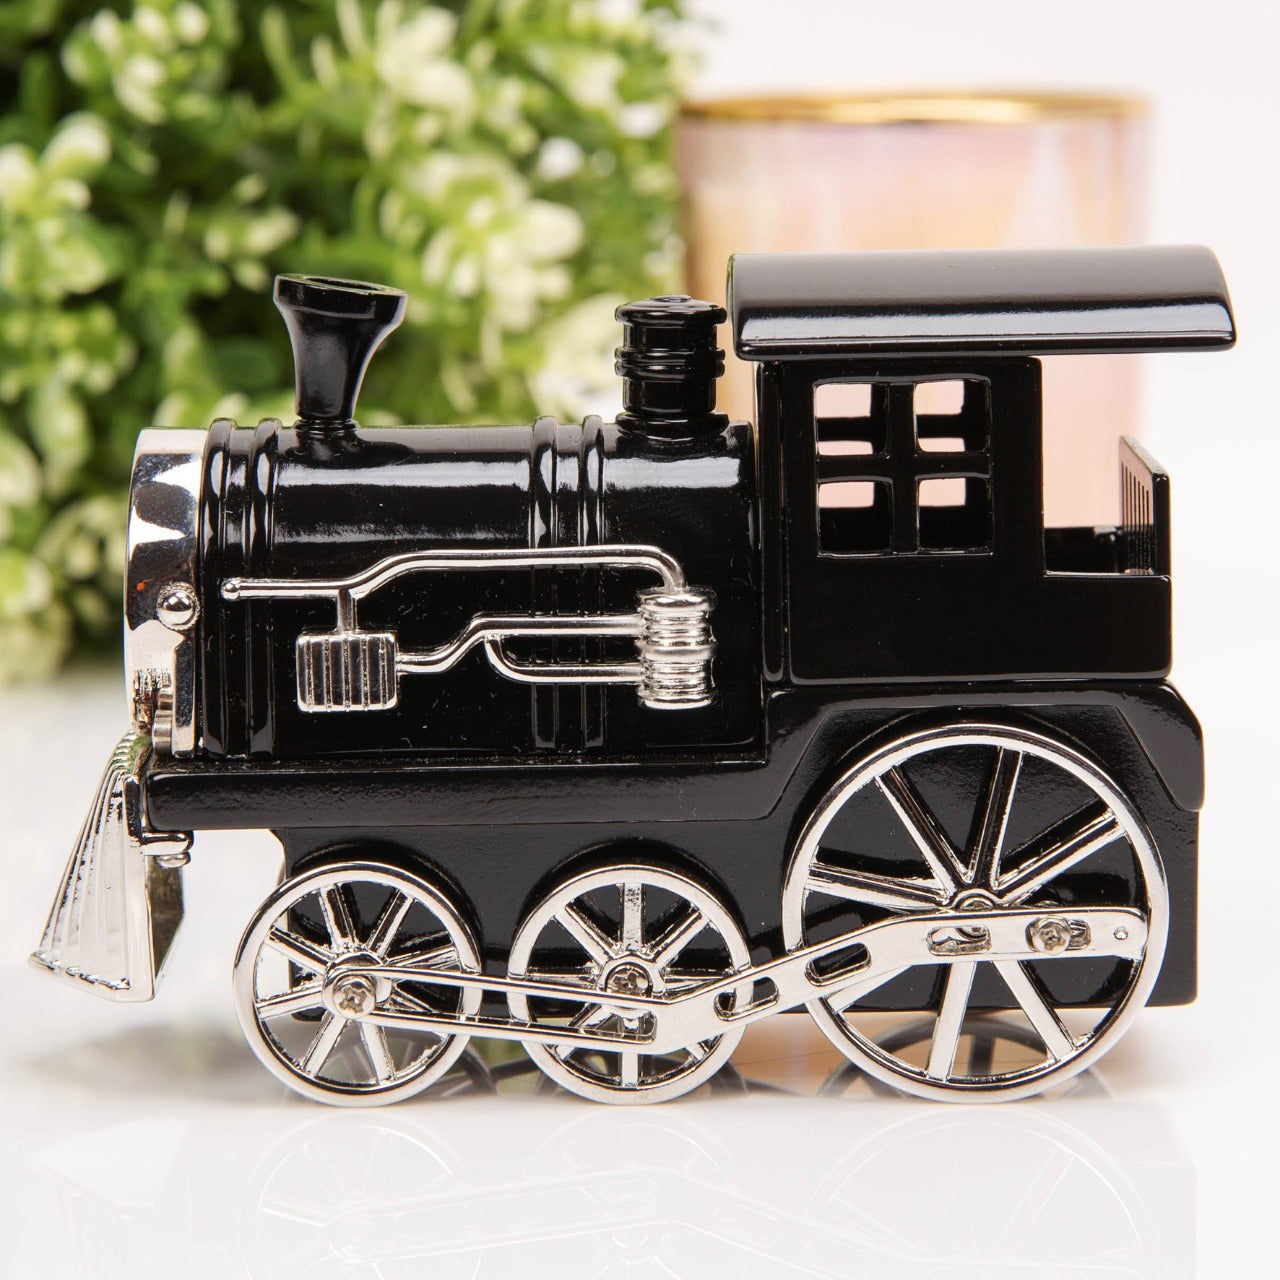 Miniature Clock - Black Steam Train  Give the train fanatic in your life the perfect gift with this intricately detailed miniature steam train clock. From WILLIAM WIDDOP - over 130 years of unrivalled innovation and unbeatable quality in British timekeeping.